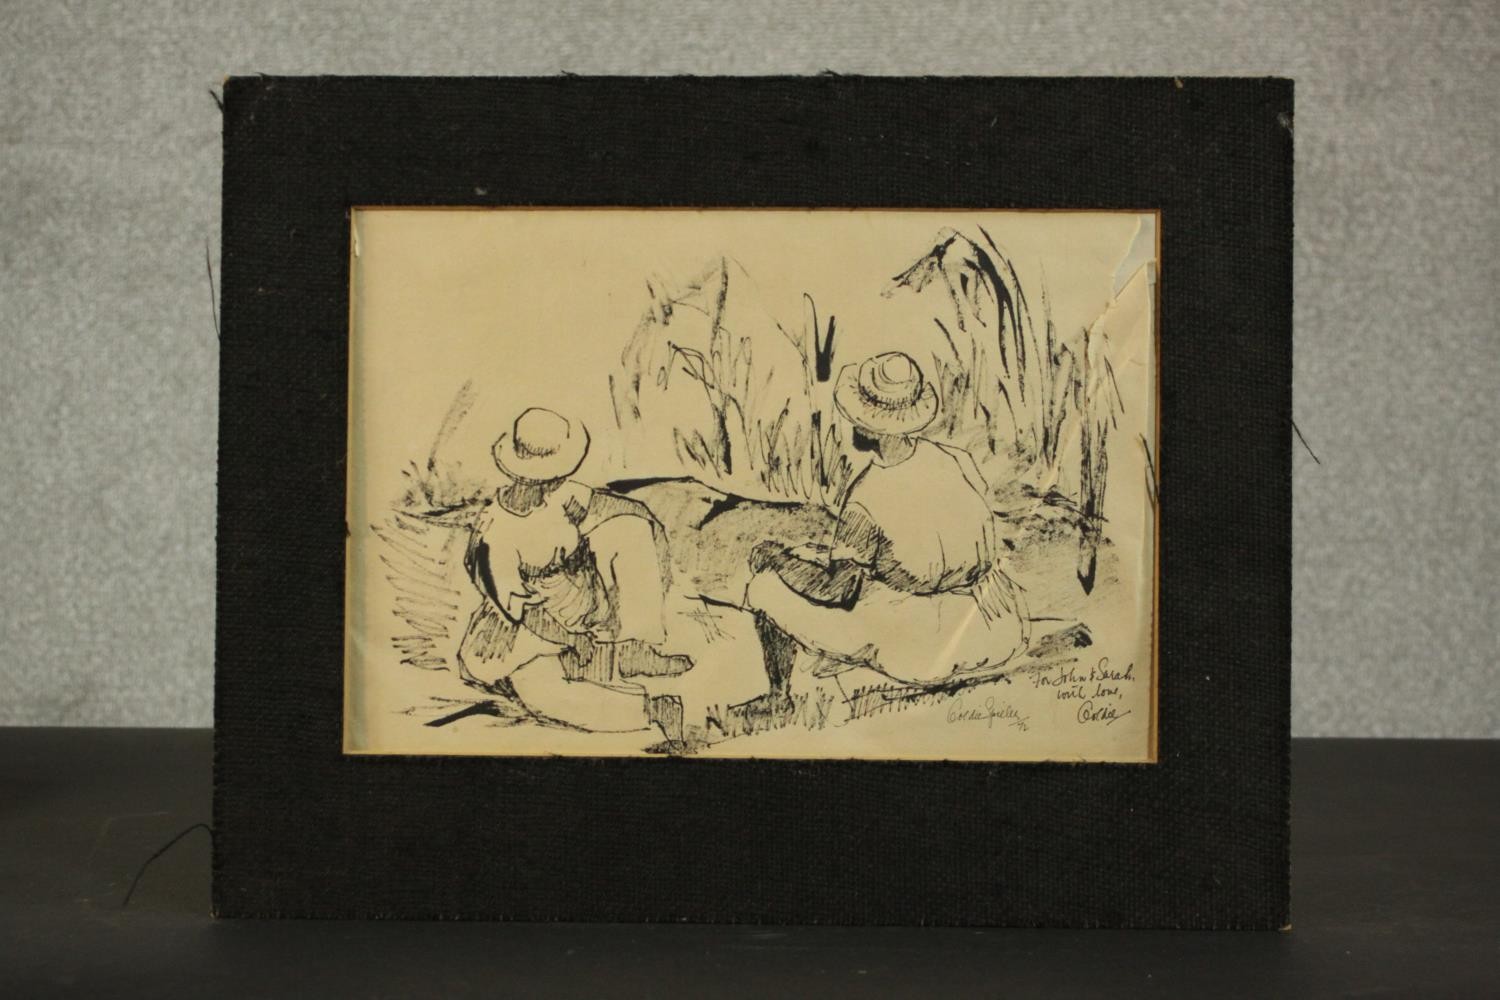 Goldie Spieler, pen and ink sketch of two seated figures, signed, dated and inscribed. H.50 W. - Image 2 of 4